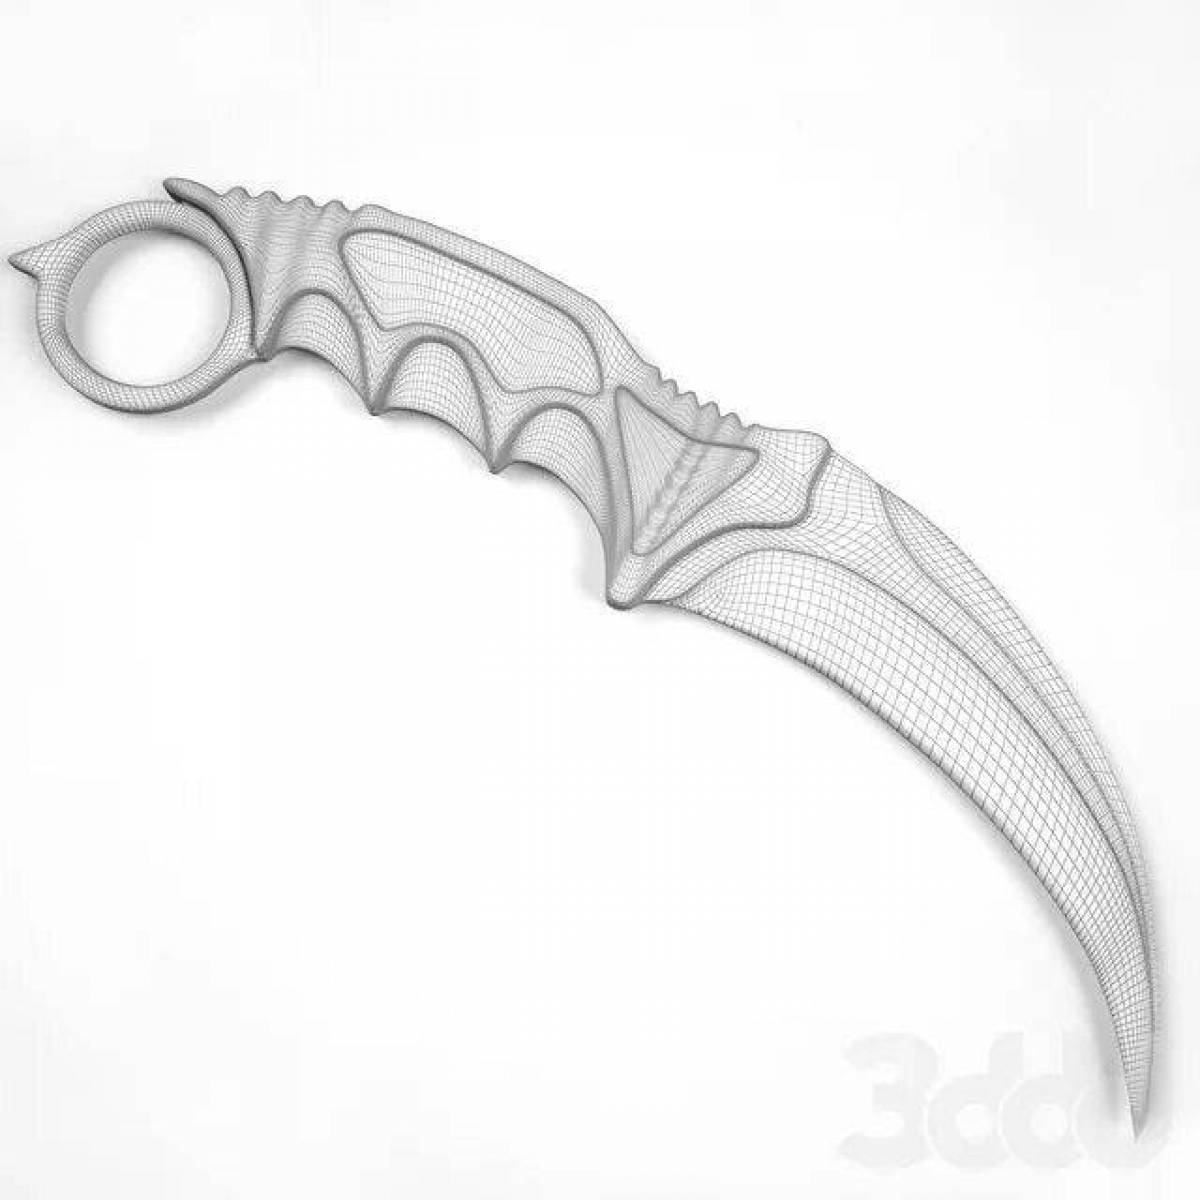 Tempting coloring of the karambit knife from standoff 2